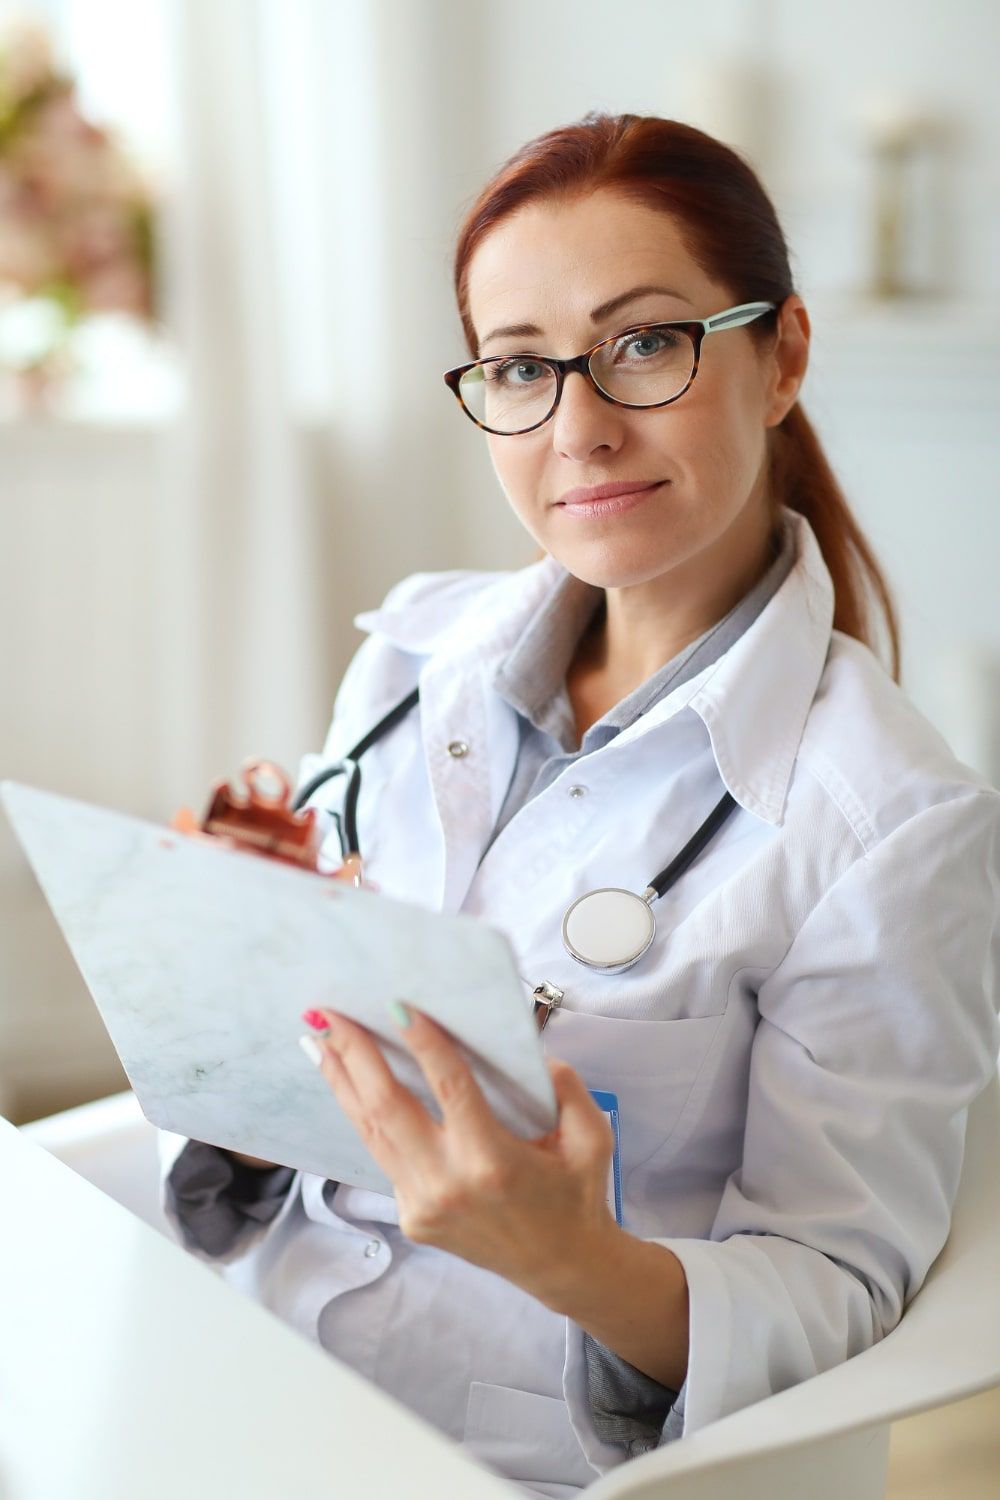 A female doctor is reading blood test results from a clipboard she is holding.